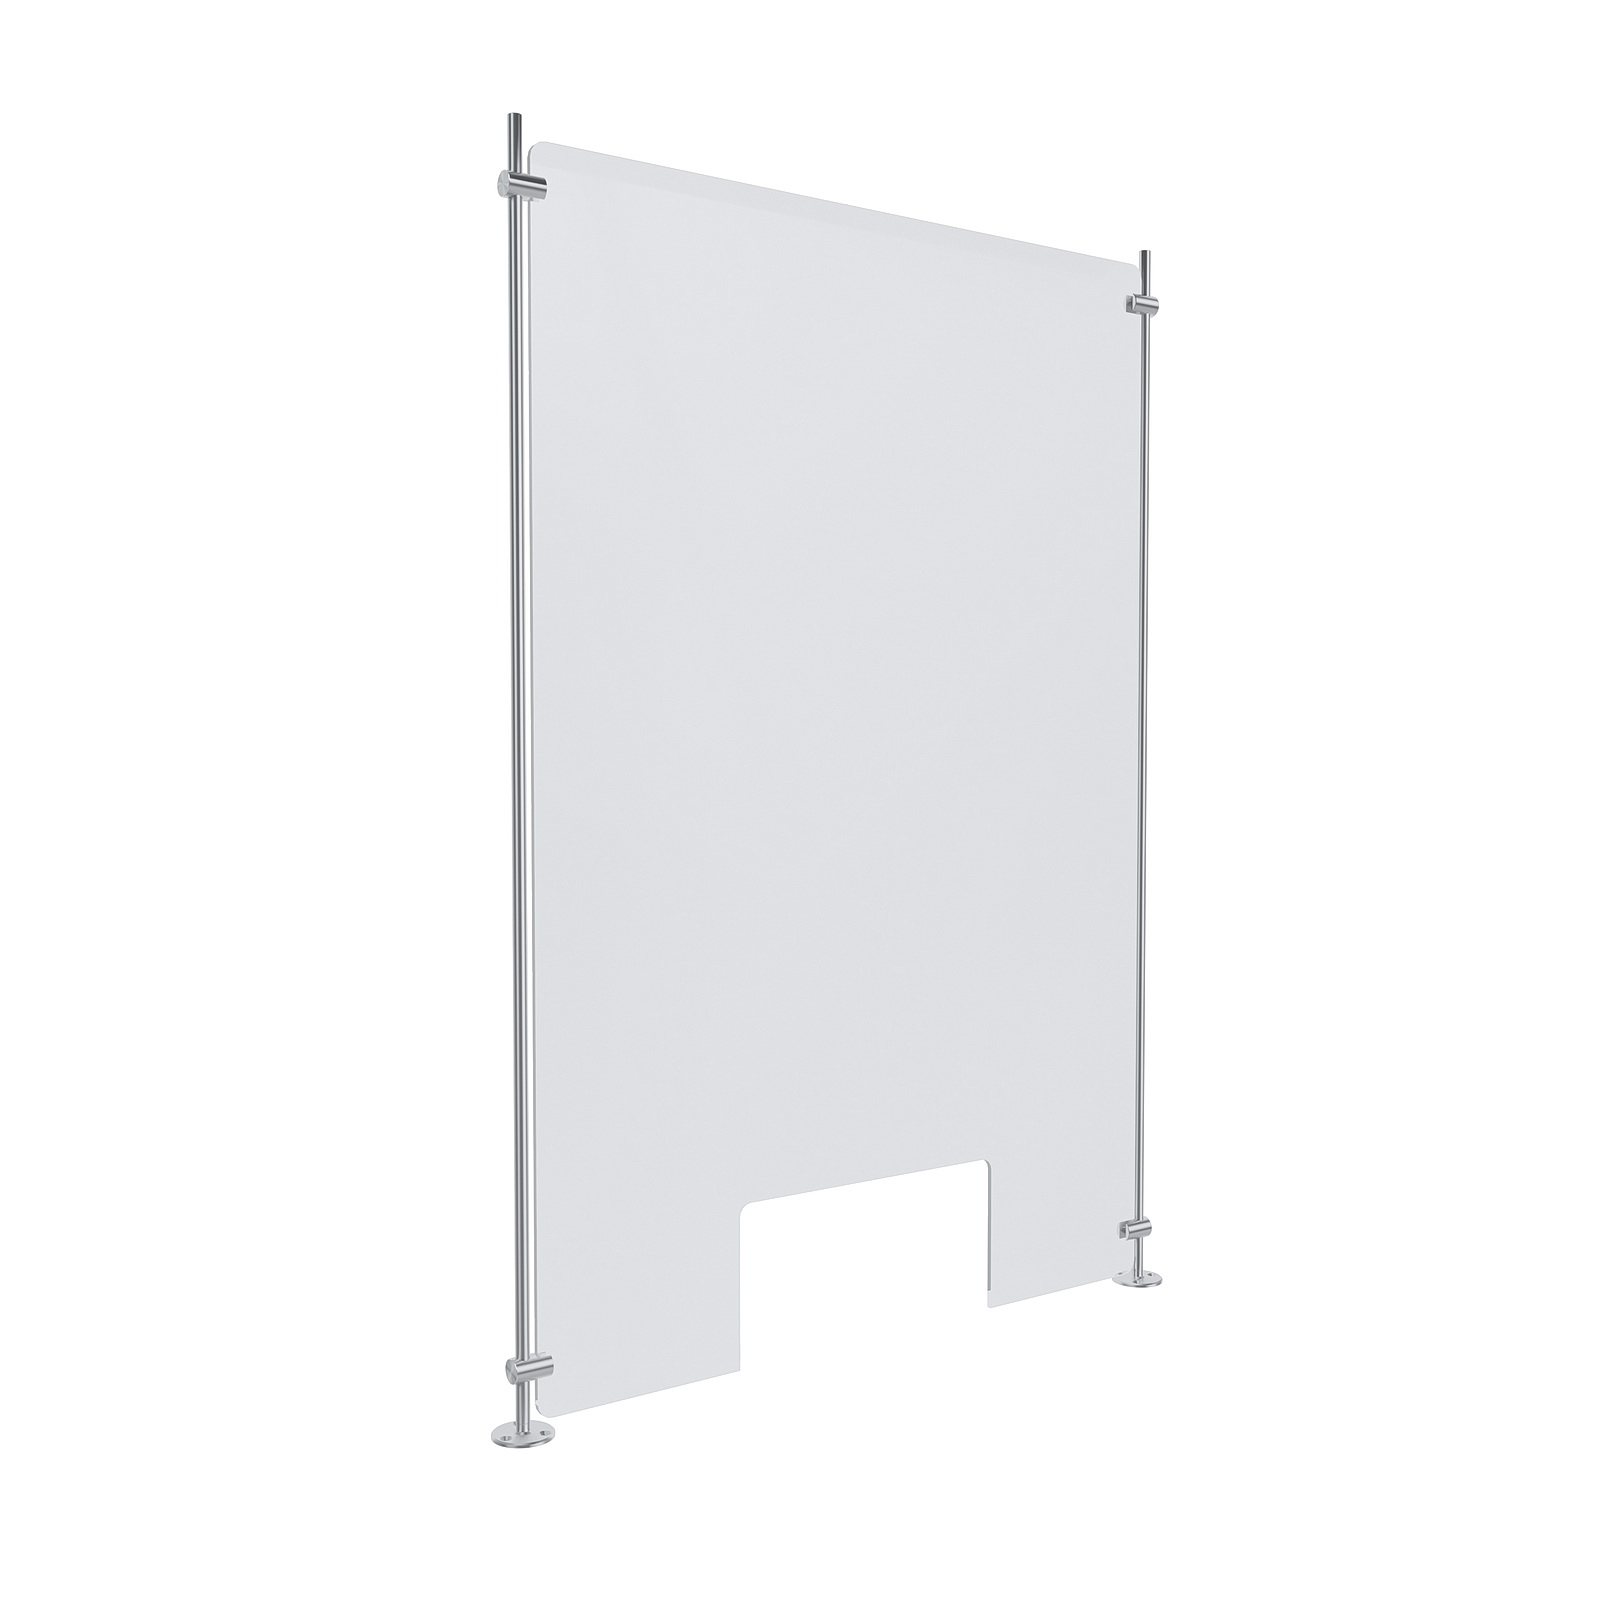 Clear Acrylic Sneeze Guard 23-1/2'' Wide x 35'' Tall (10'' x 5'' Cut Out), with (2) 36'' Tall x 3/8'' Diameter Clear Anodized Aluminum Rods on the Side 